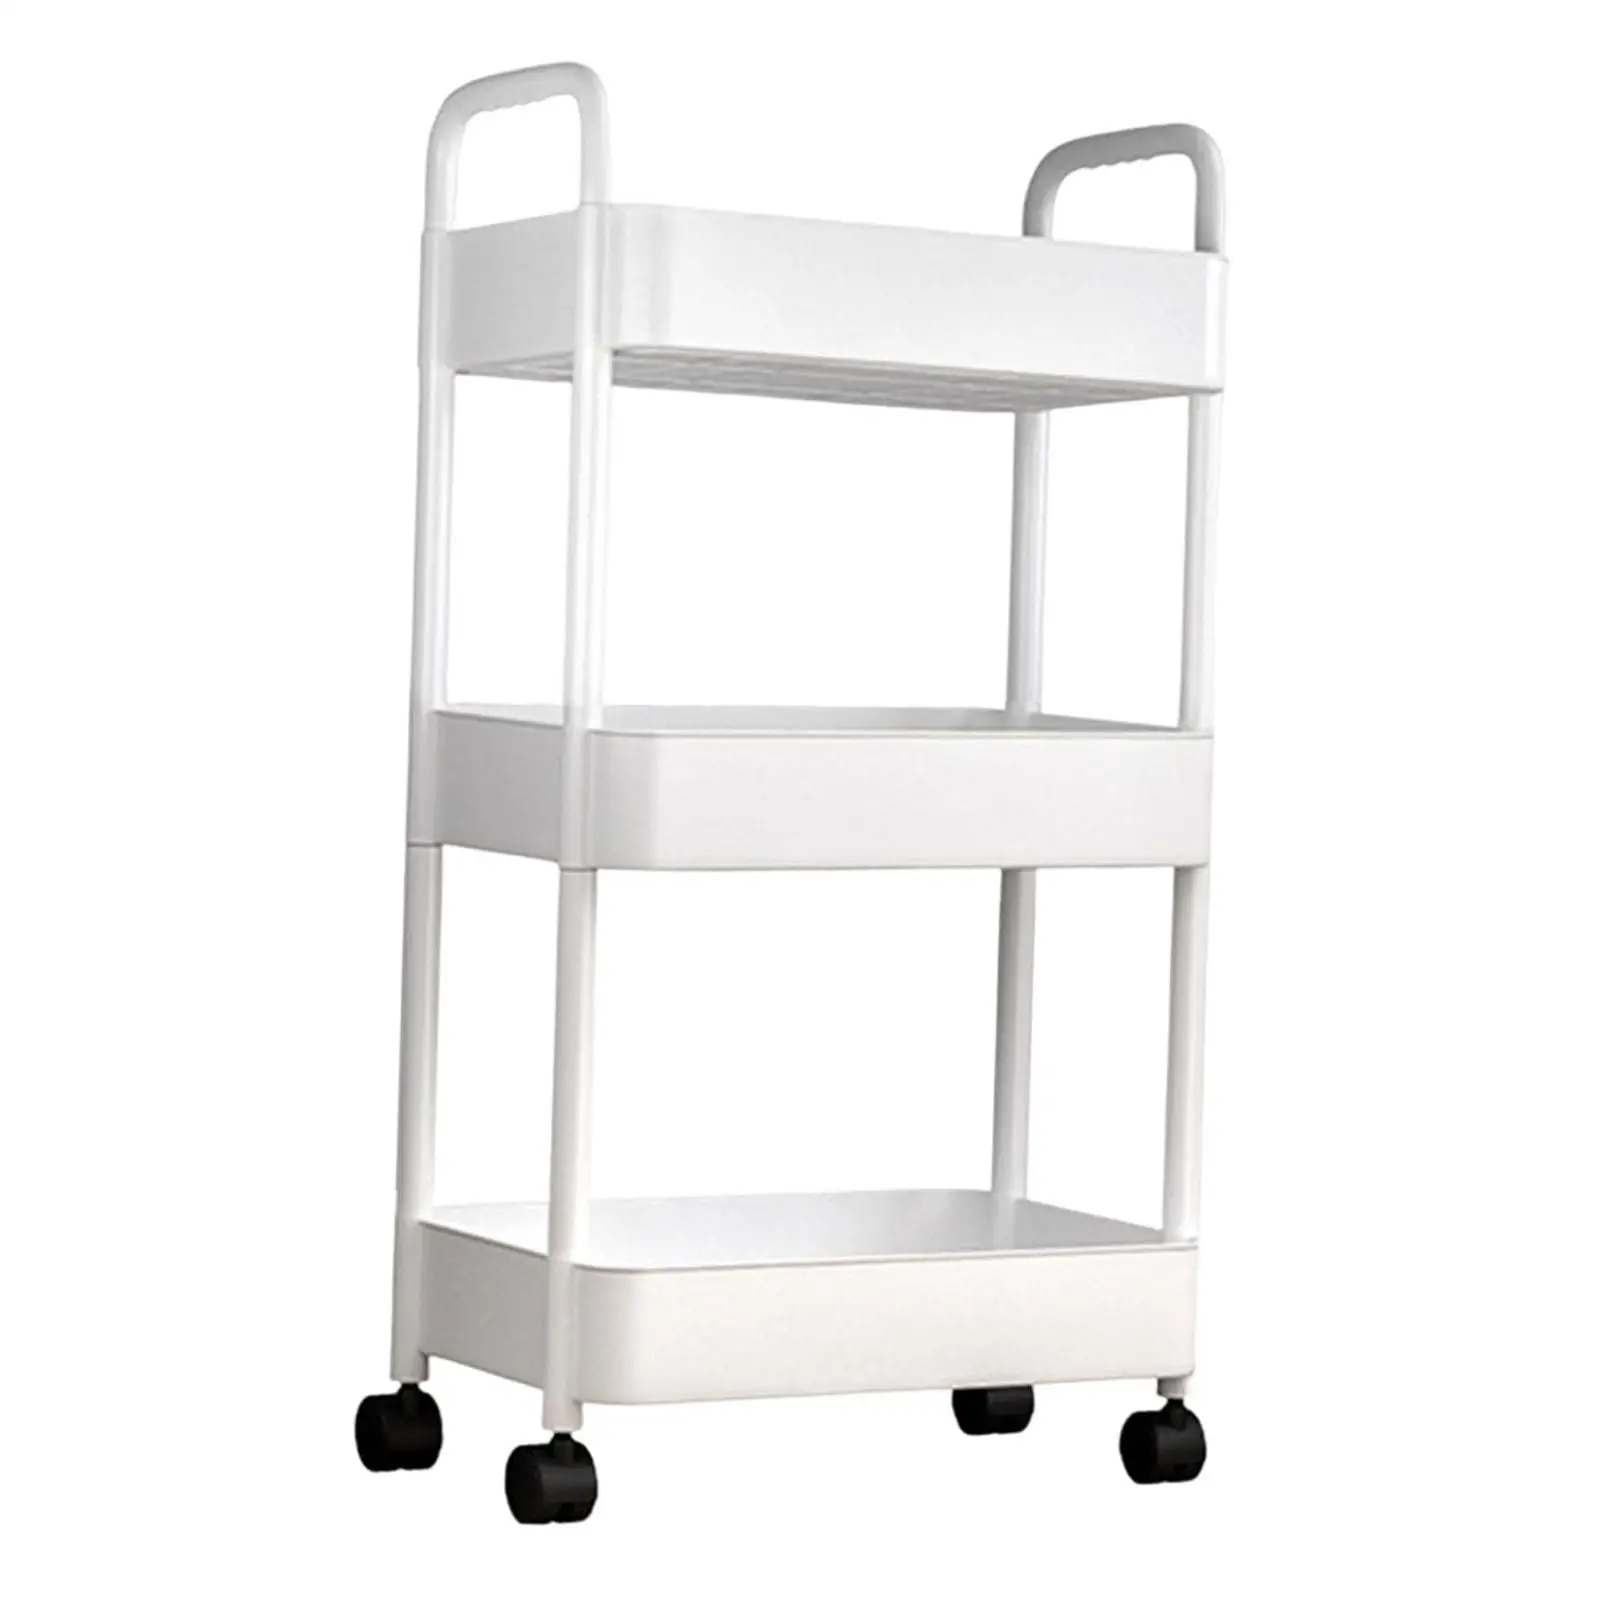 3 Tier Kitchen Cart with Caster Wheels Organization Cart for Home Office